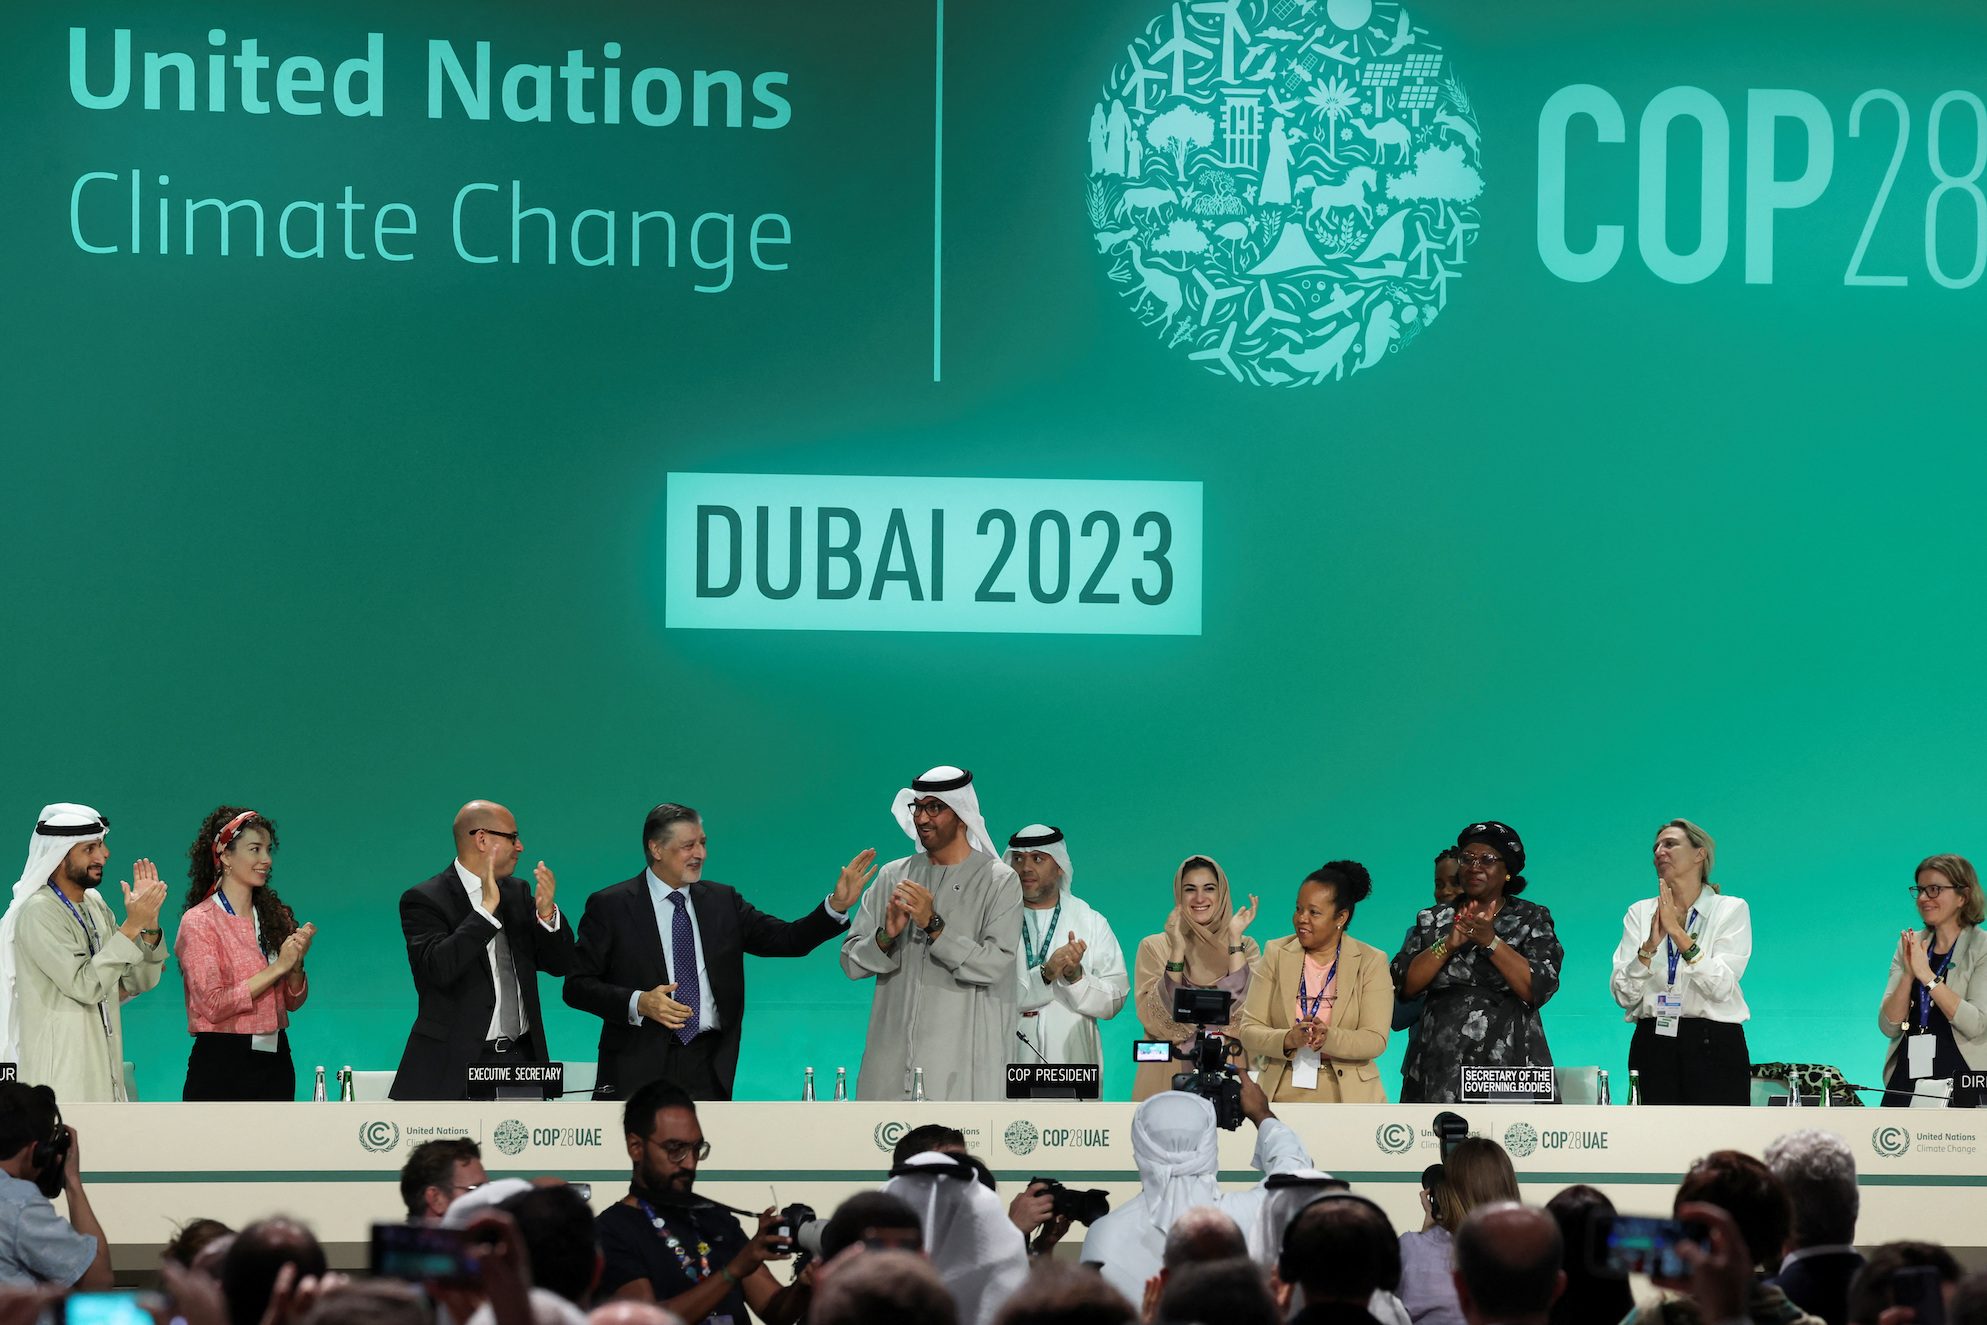 COP28 president urges countries to set plans for fossil fuel transition